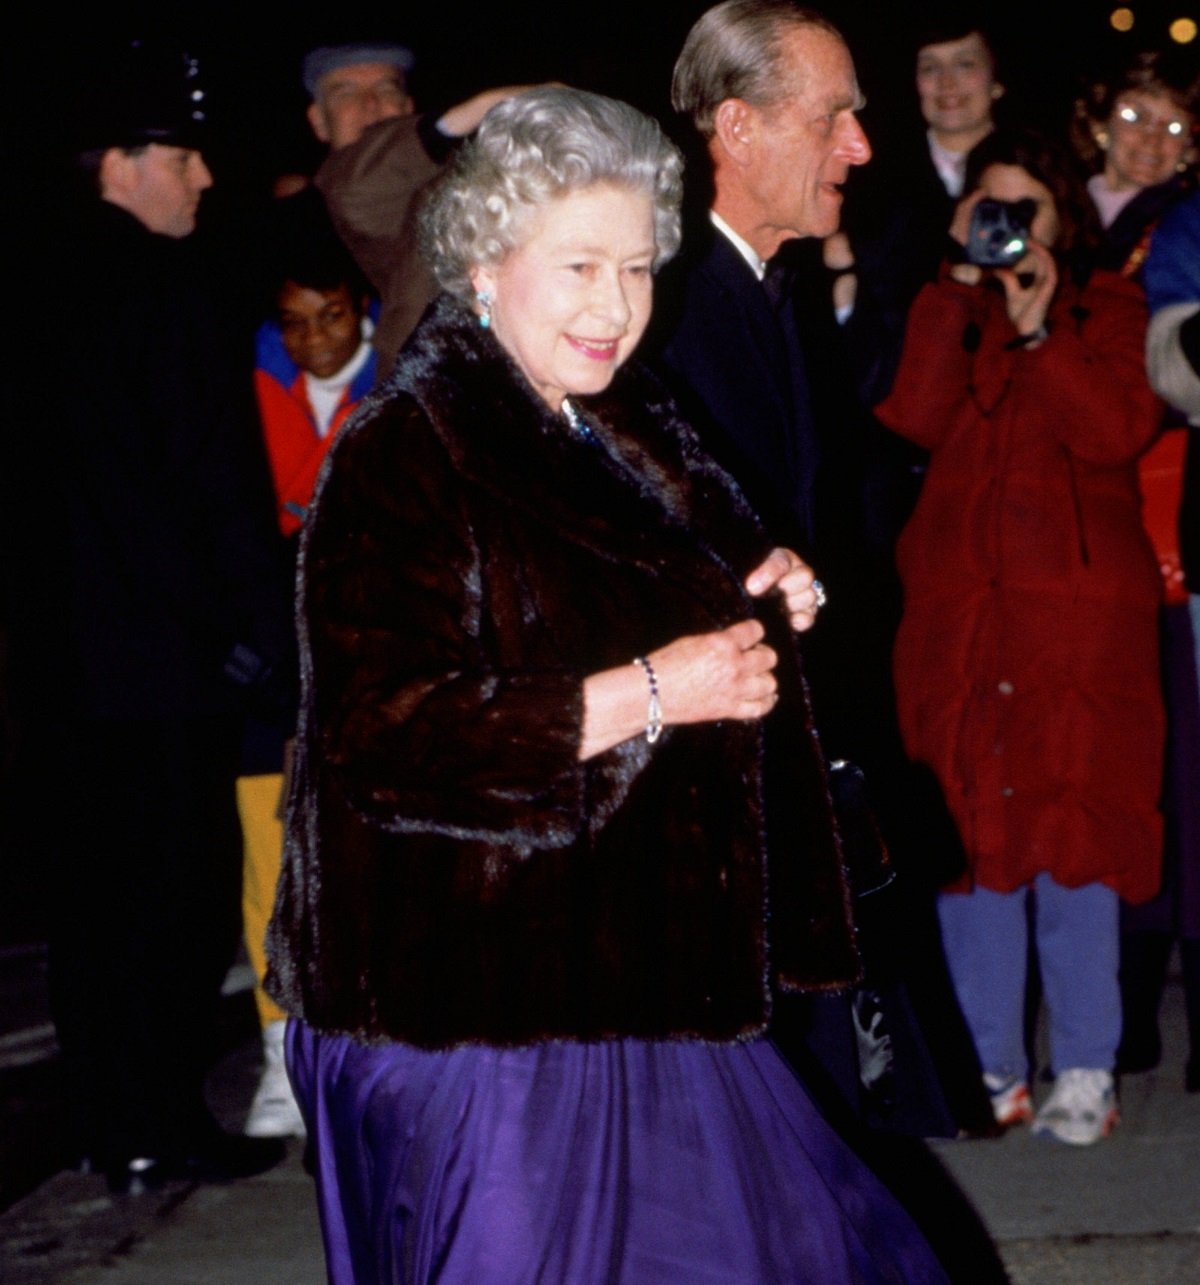 Queen Elizabeth II wearing a fur coat as she leaves a dinner party in Grosvenor Square